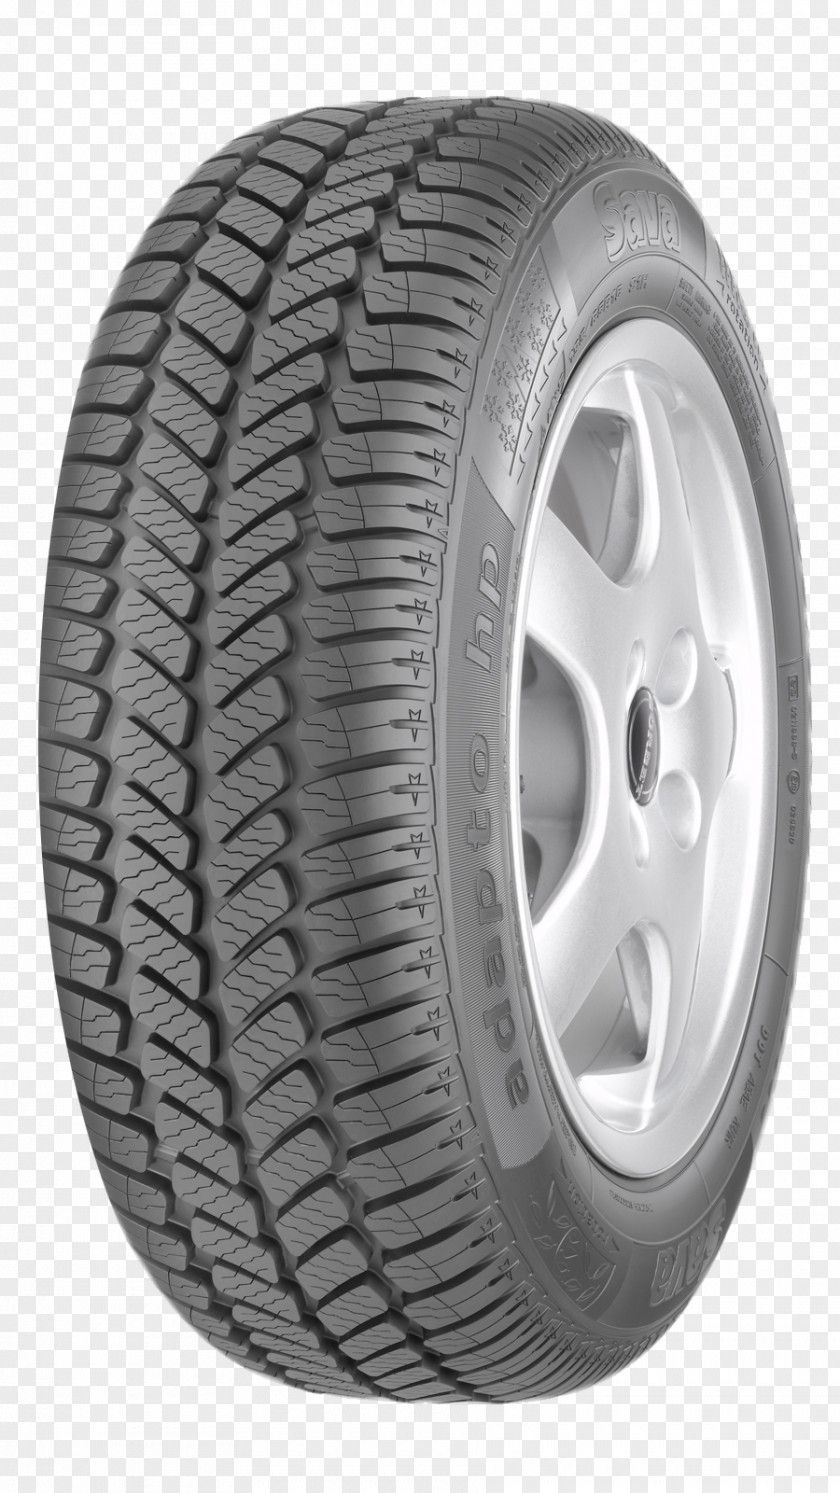 Car Goodyear Tire And Rubber Company Bridgestone Tyre Label PNG